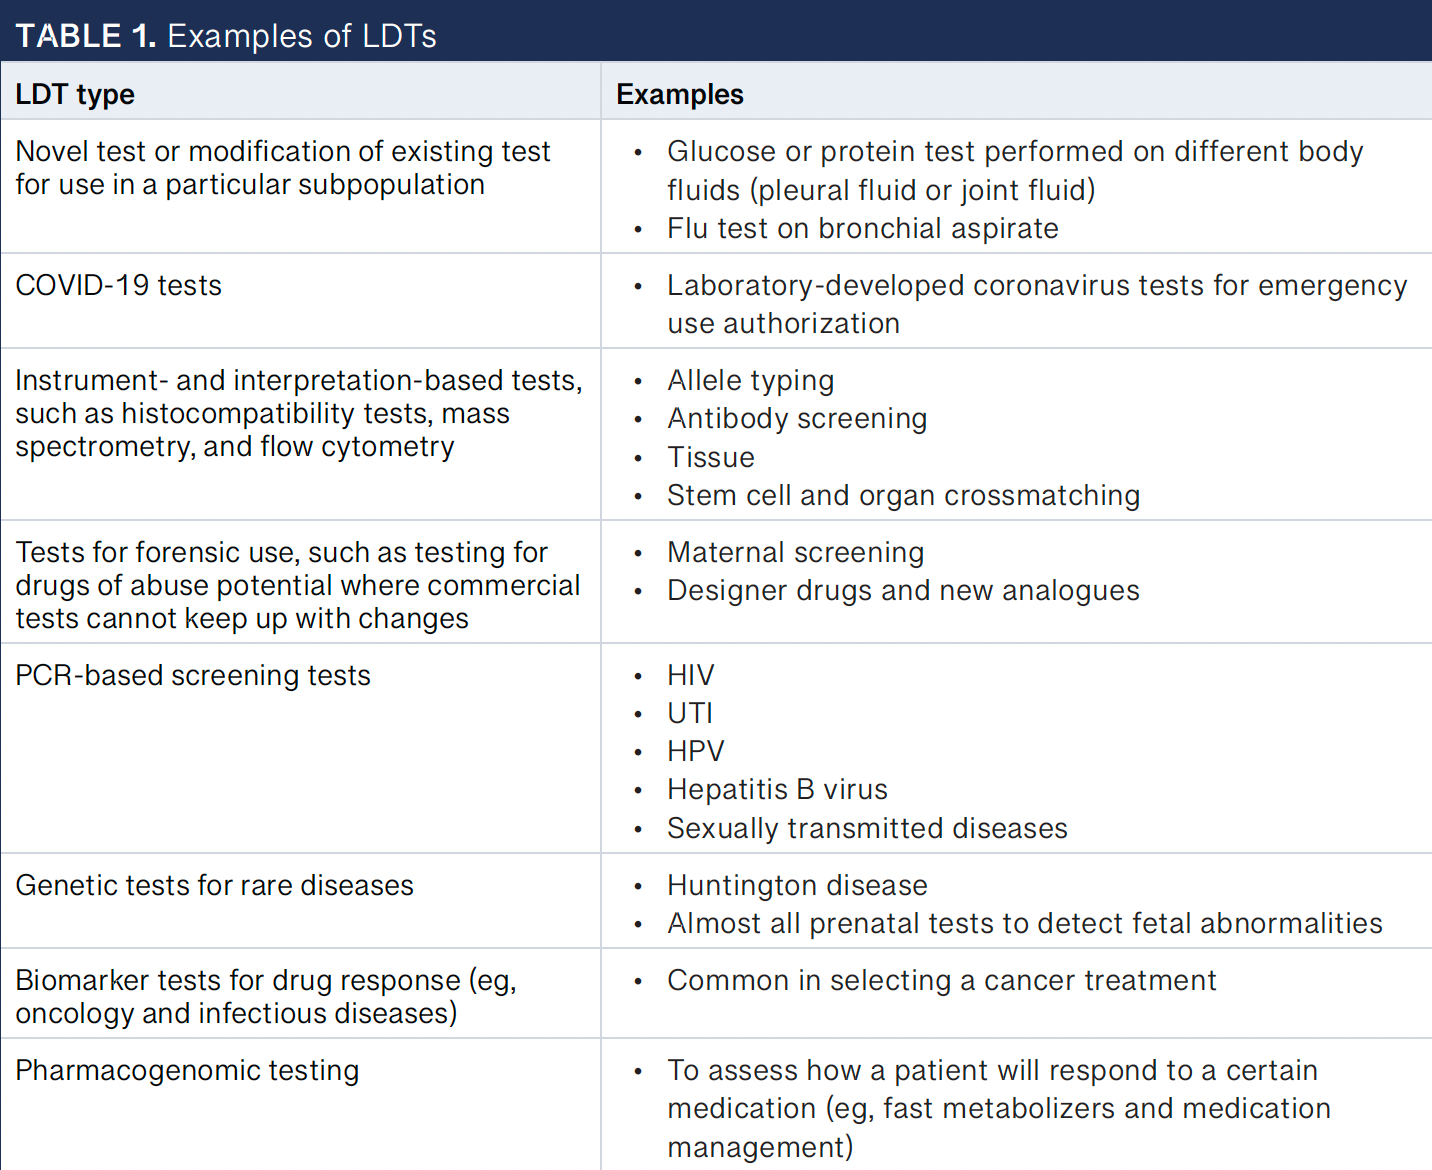 Table 1: Examples of LDTs -- PCR, polymerase chain reaction; HPV, human papillomavirus; LDT, laboratory-developed tests; UTI, urinary tract infection.